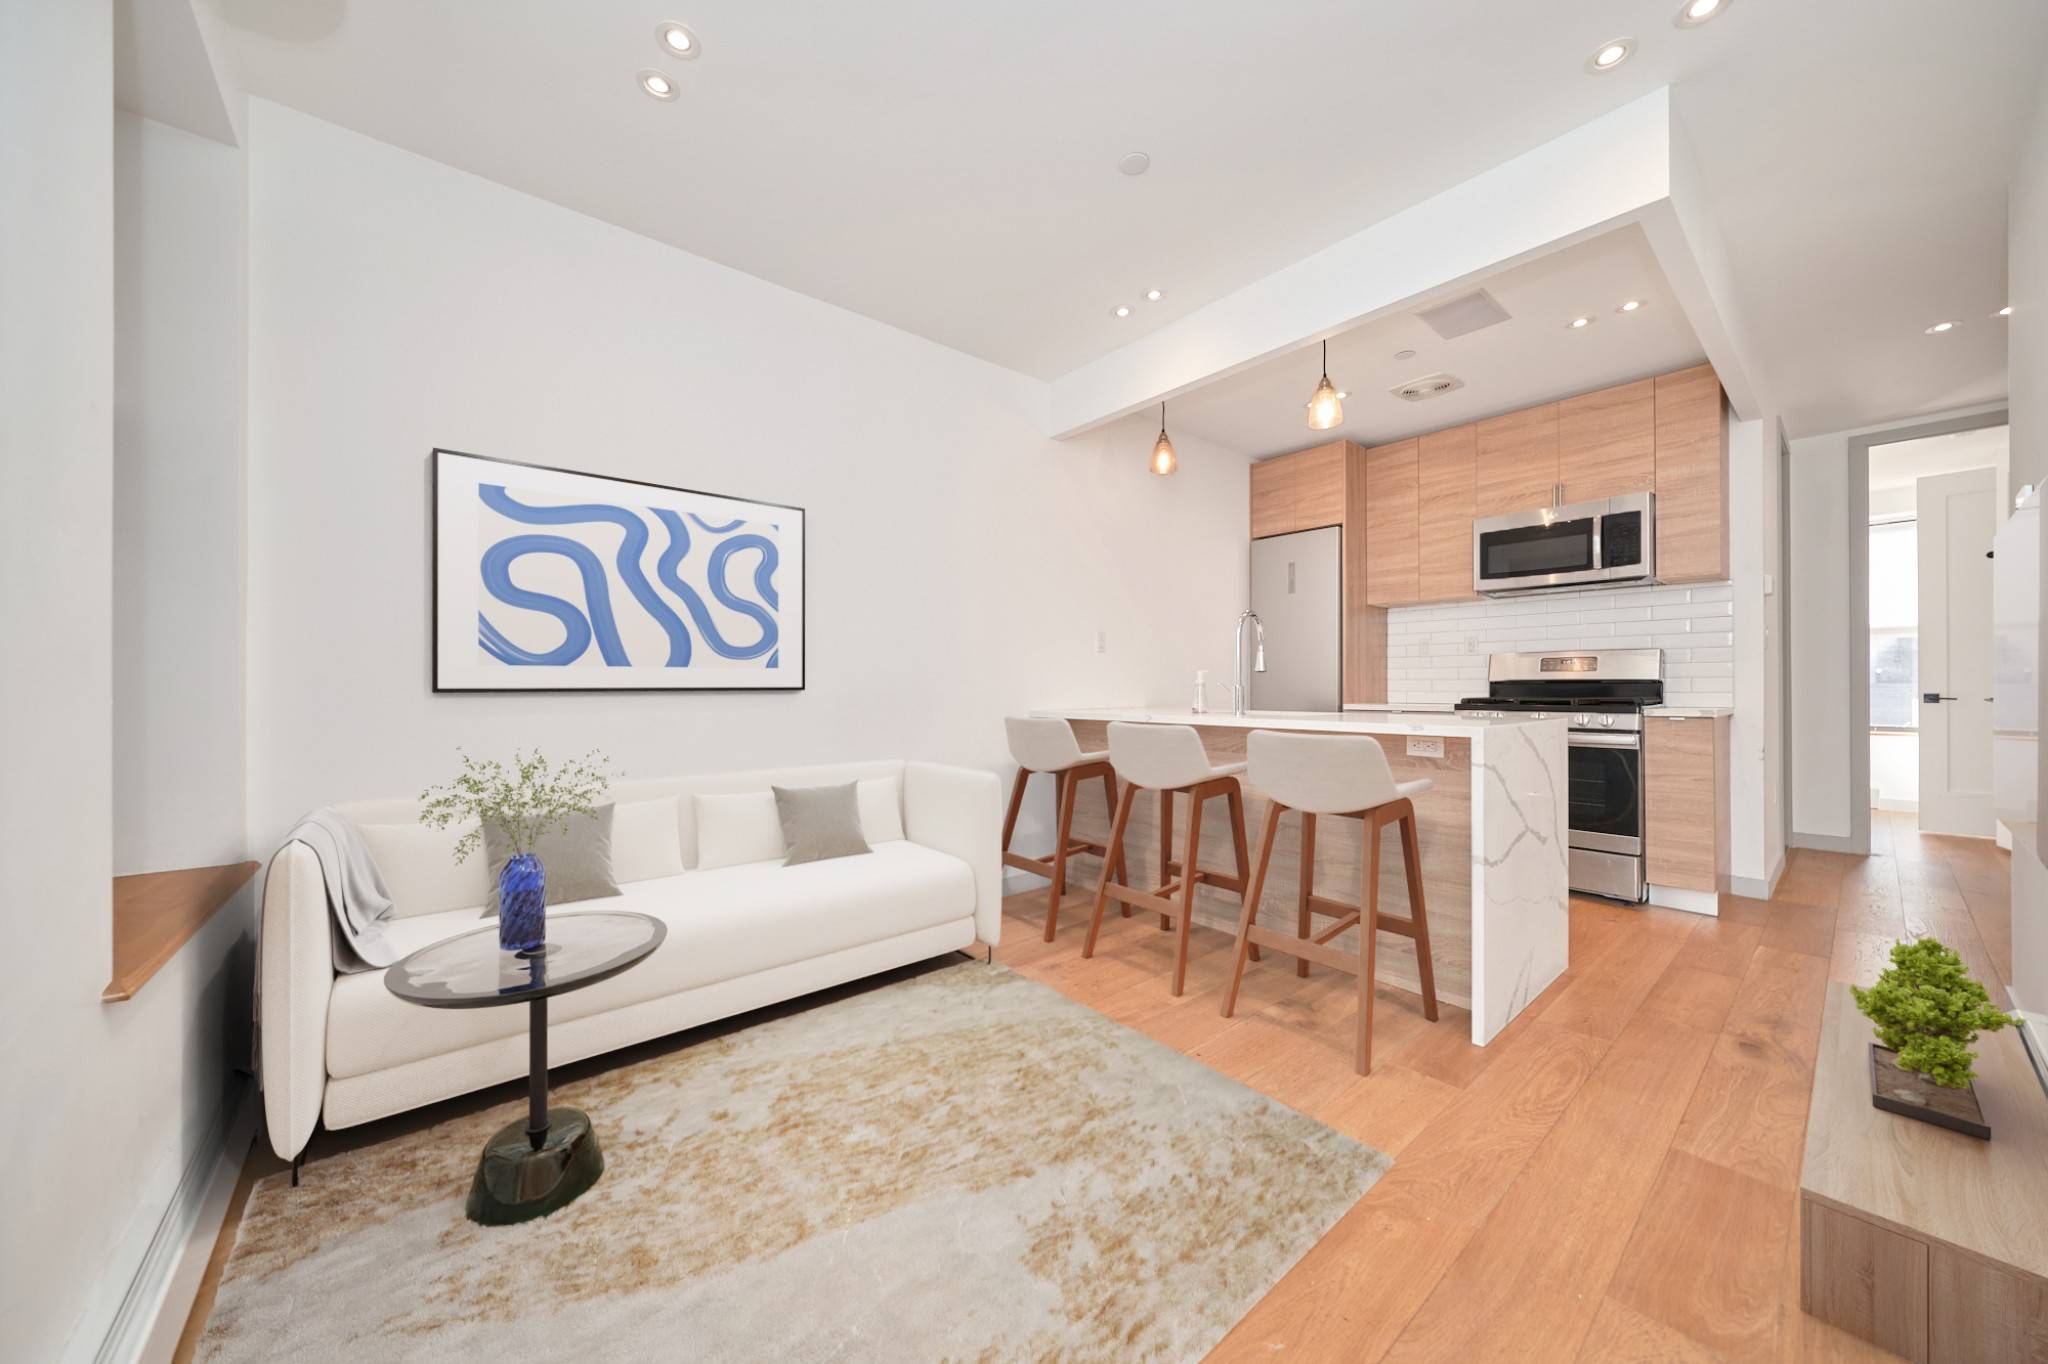 FFEATURES Fully equipped open kitchen with stainless appliances, dishwasher amp ; microwave Primary bedroom features a private en suite bathroom Generously sized bedrooms with exposed brick and large closets Beautifully ...